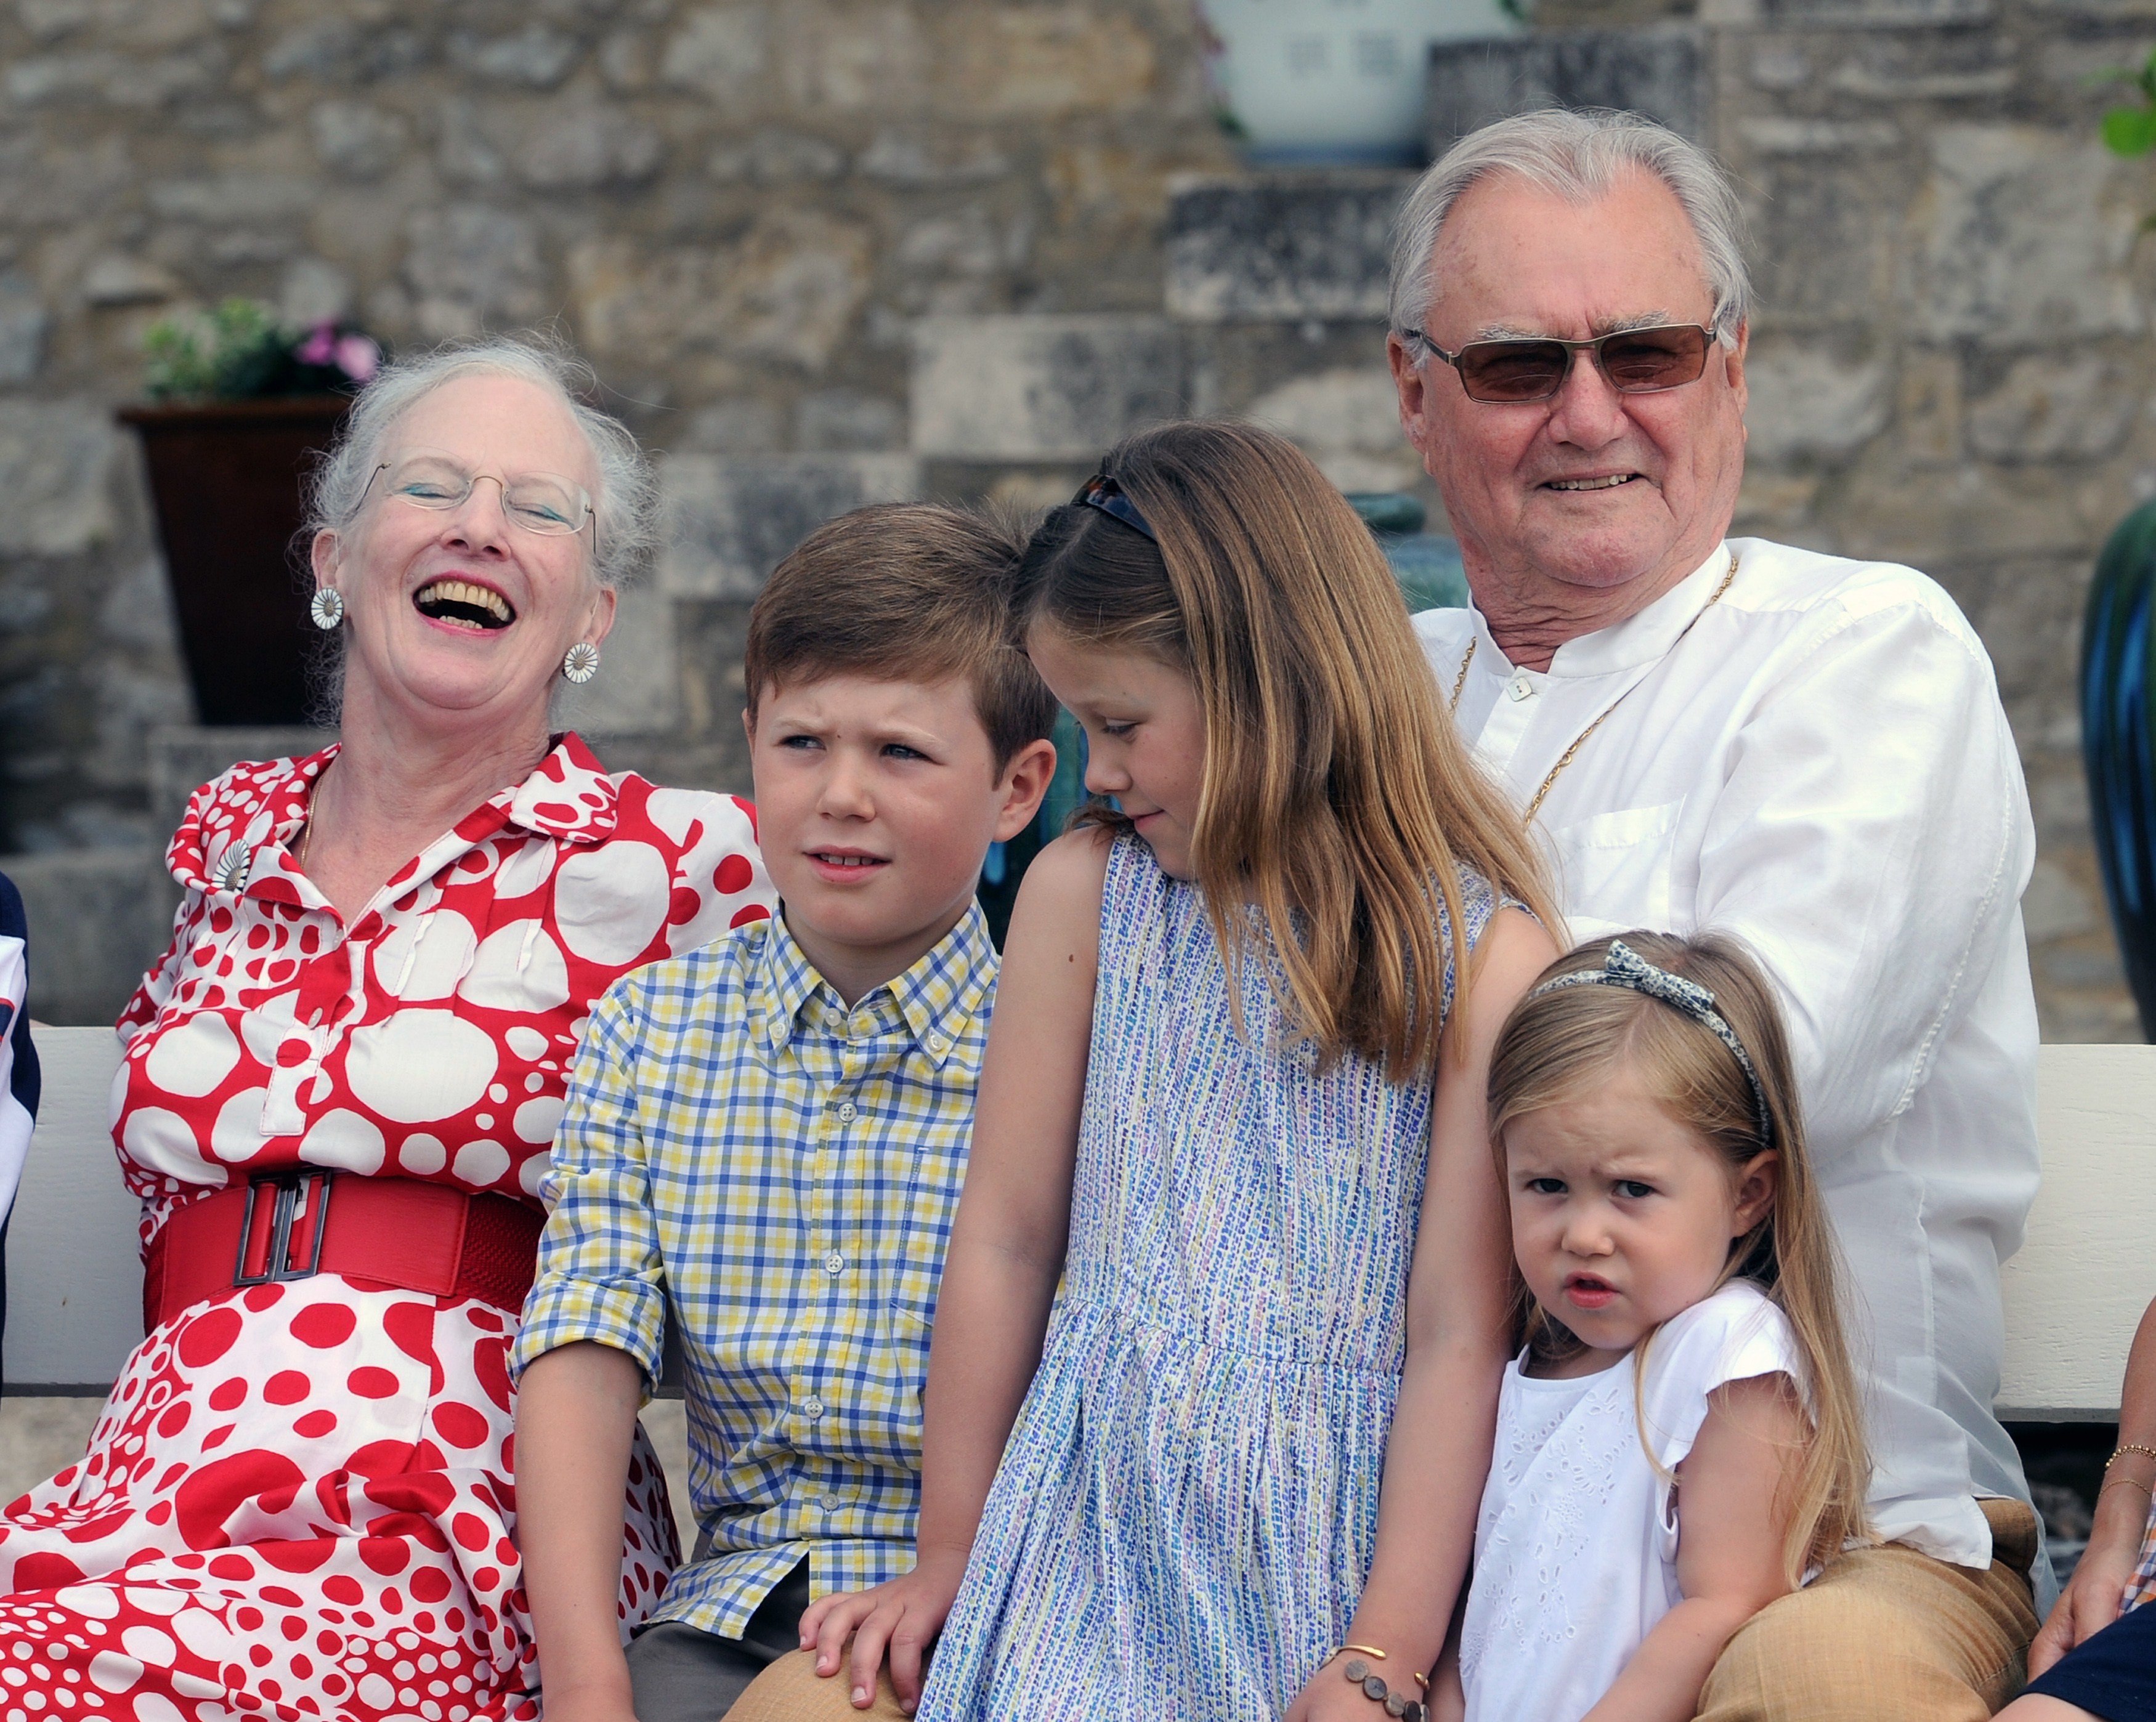 Danish Queen Margrethe II and Prince Henrik pose with some of their grandchildren on June 11, 2014, in the gardens of their chateau at Caïx. | Source: Getty Images